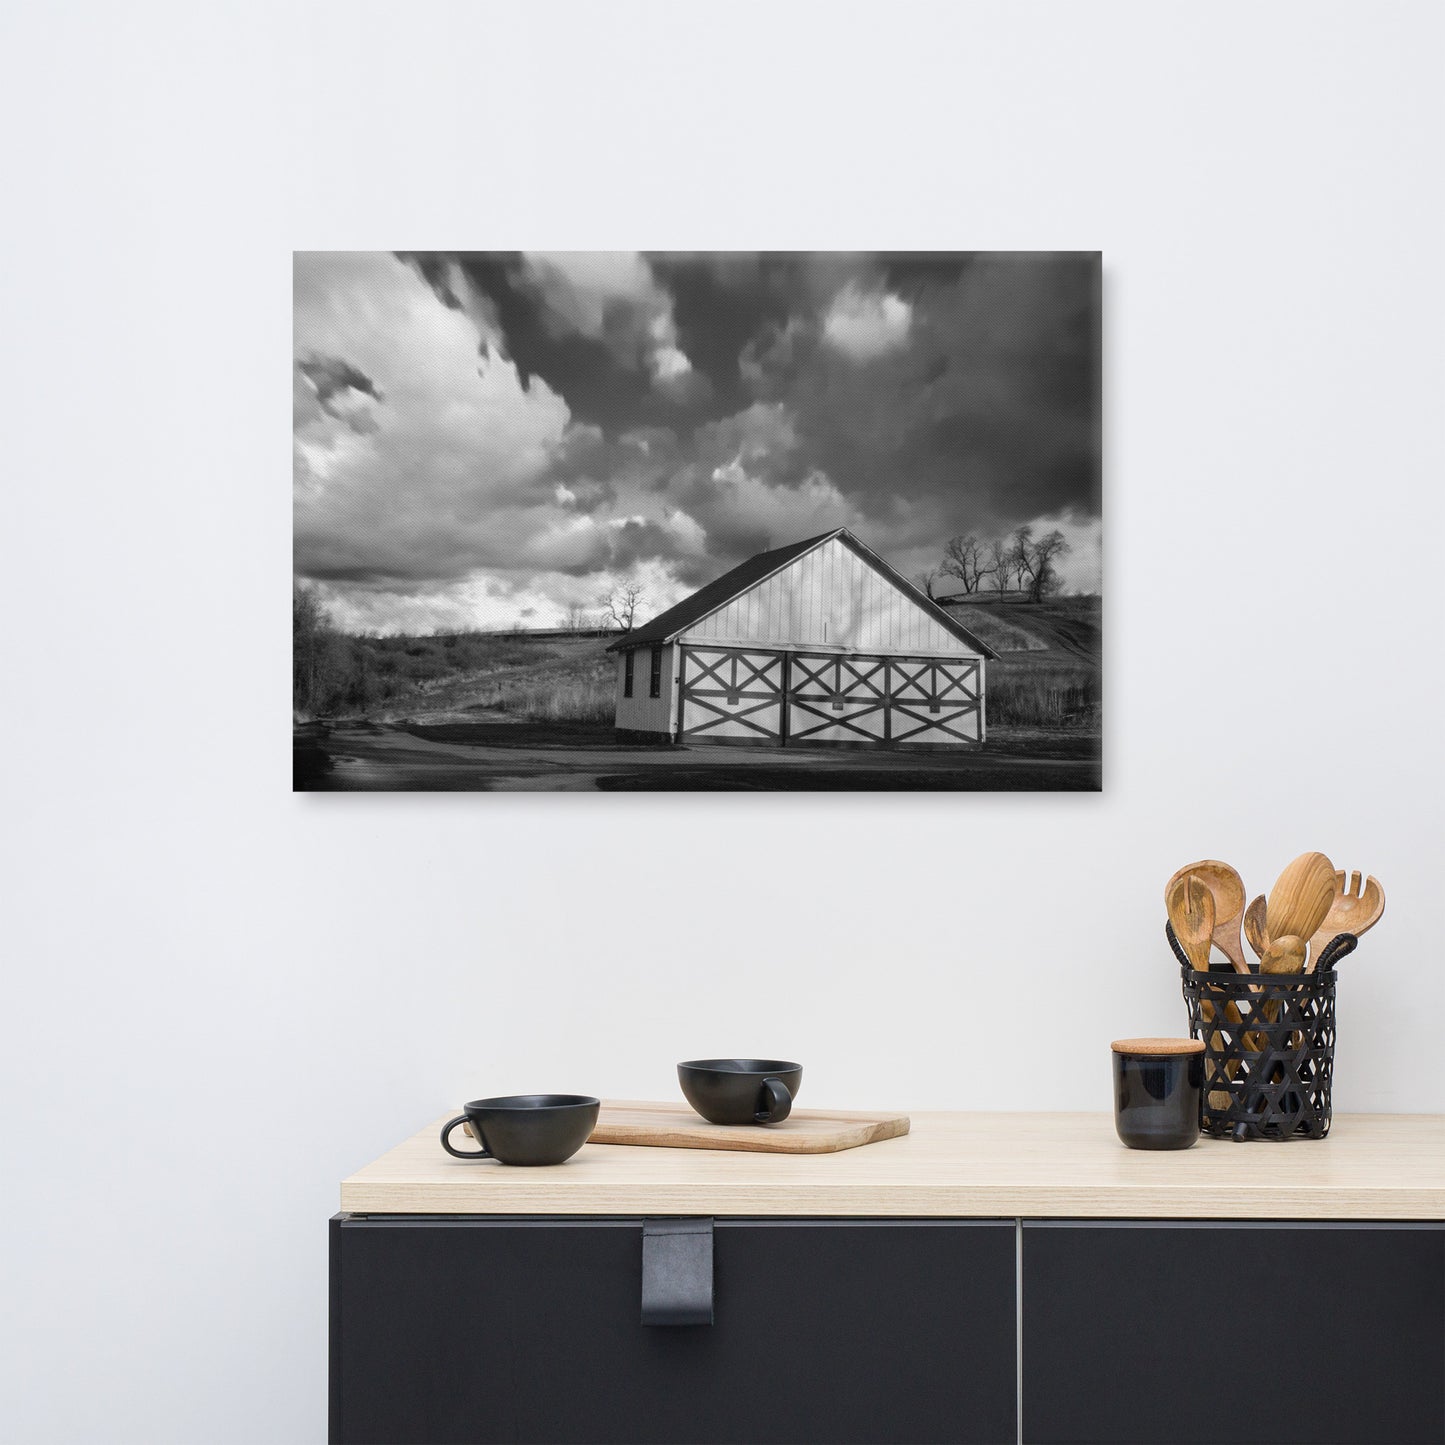 Dining Room Wall Decor: Aging Barn in the Morning Sun Black and White - Rural / Country / Farmhouse Style Landscape / Nature Photograph Canvas Wall Art Print - Wall Decor - Artwork